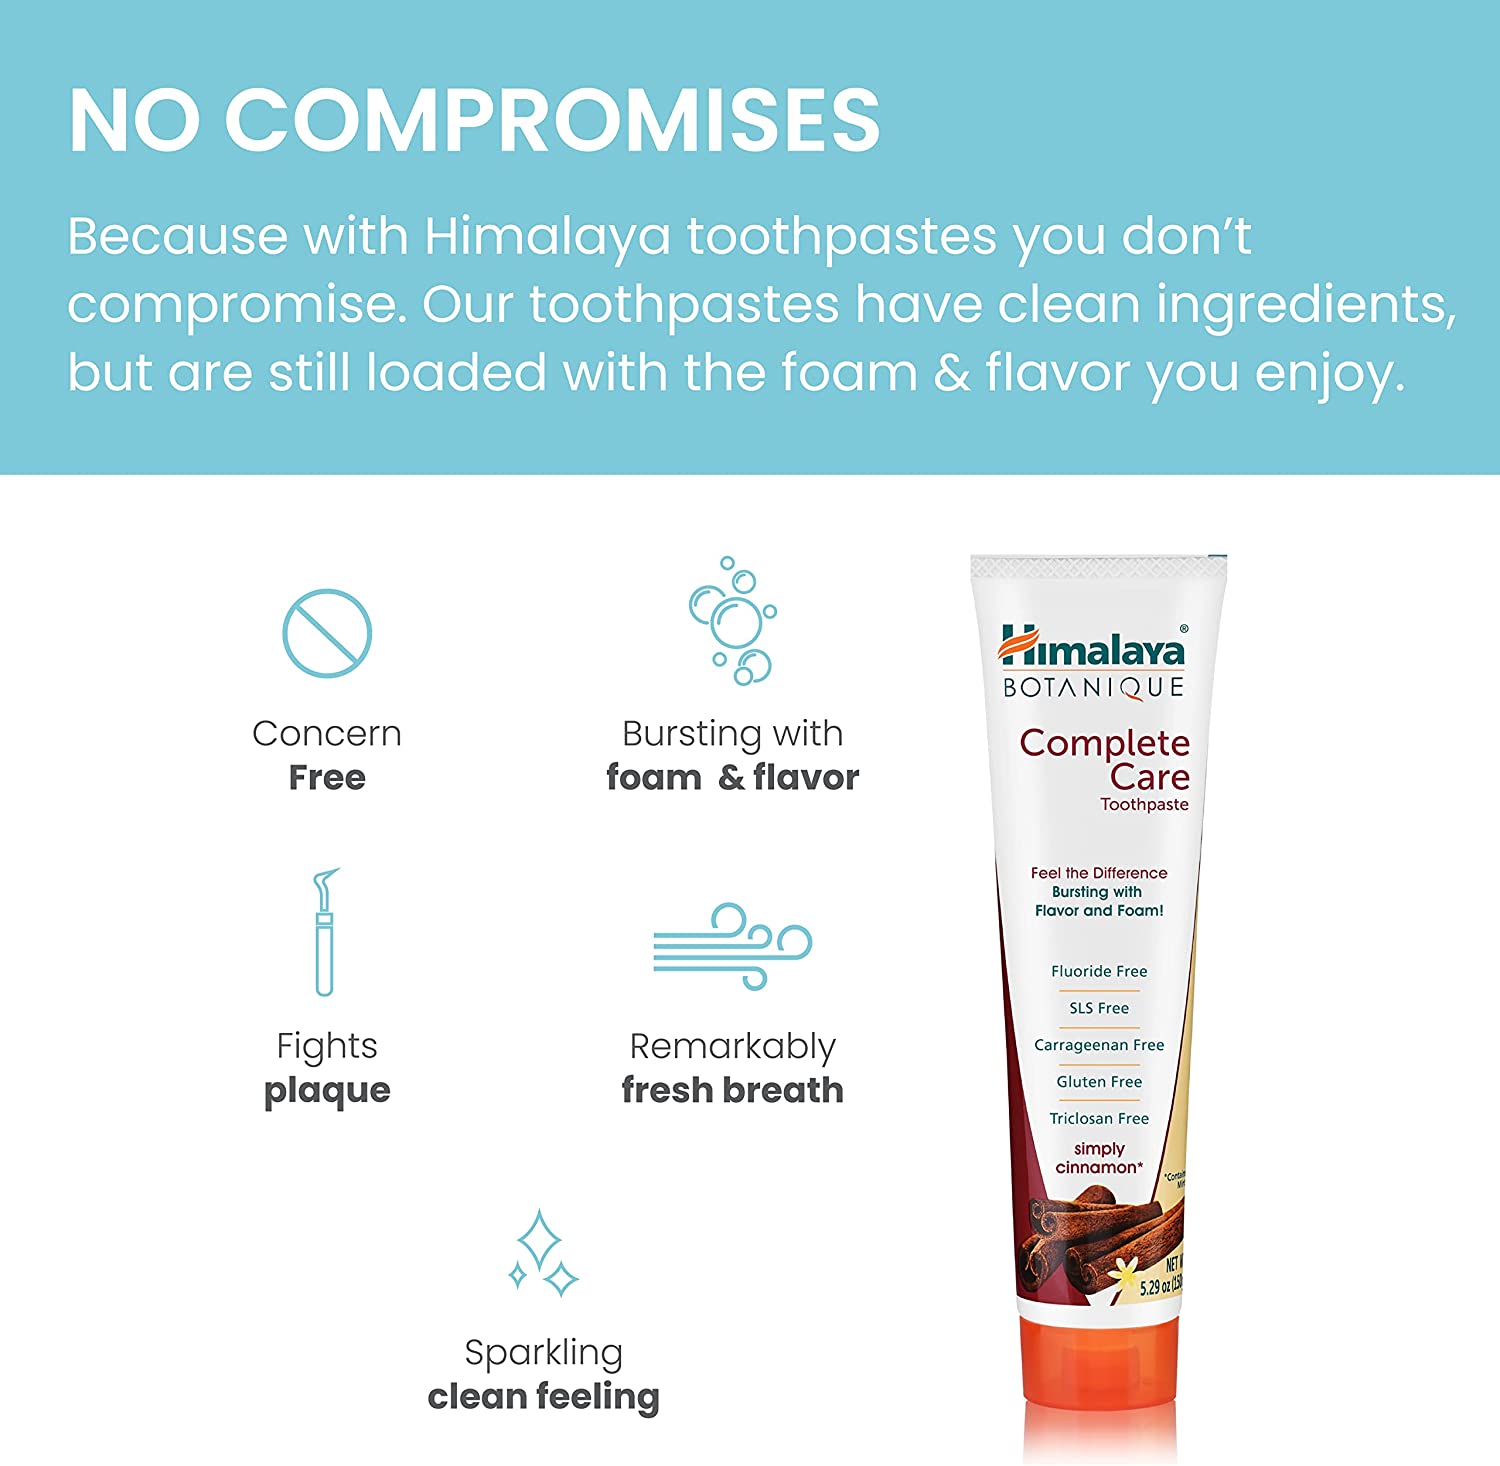 Himalaya BOTANIQUE Complete Care Toothpaste - Simply Cinnamon - 150 g (Pack of 2)